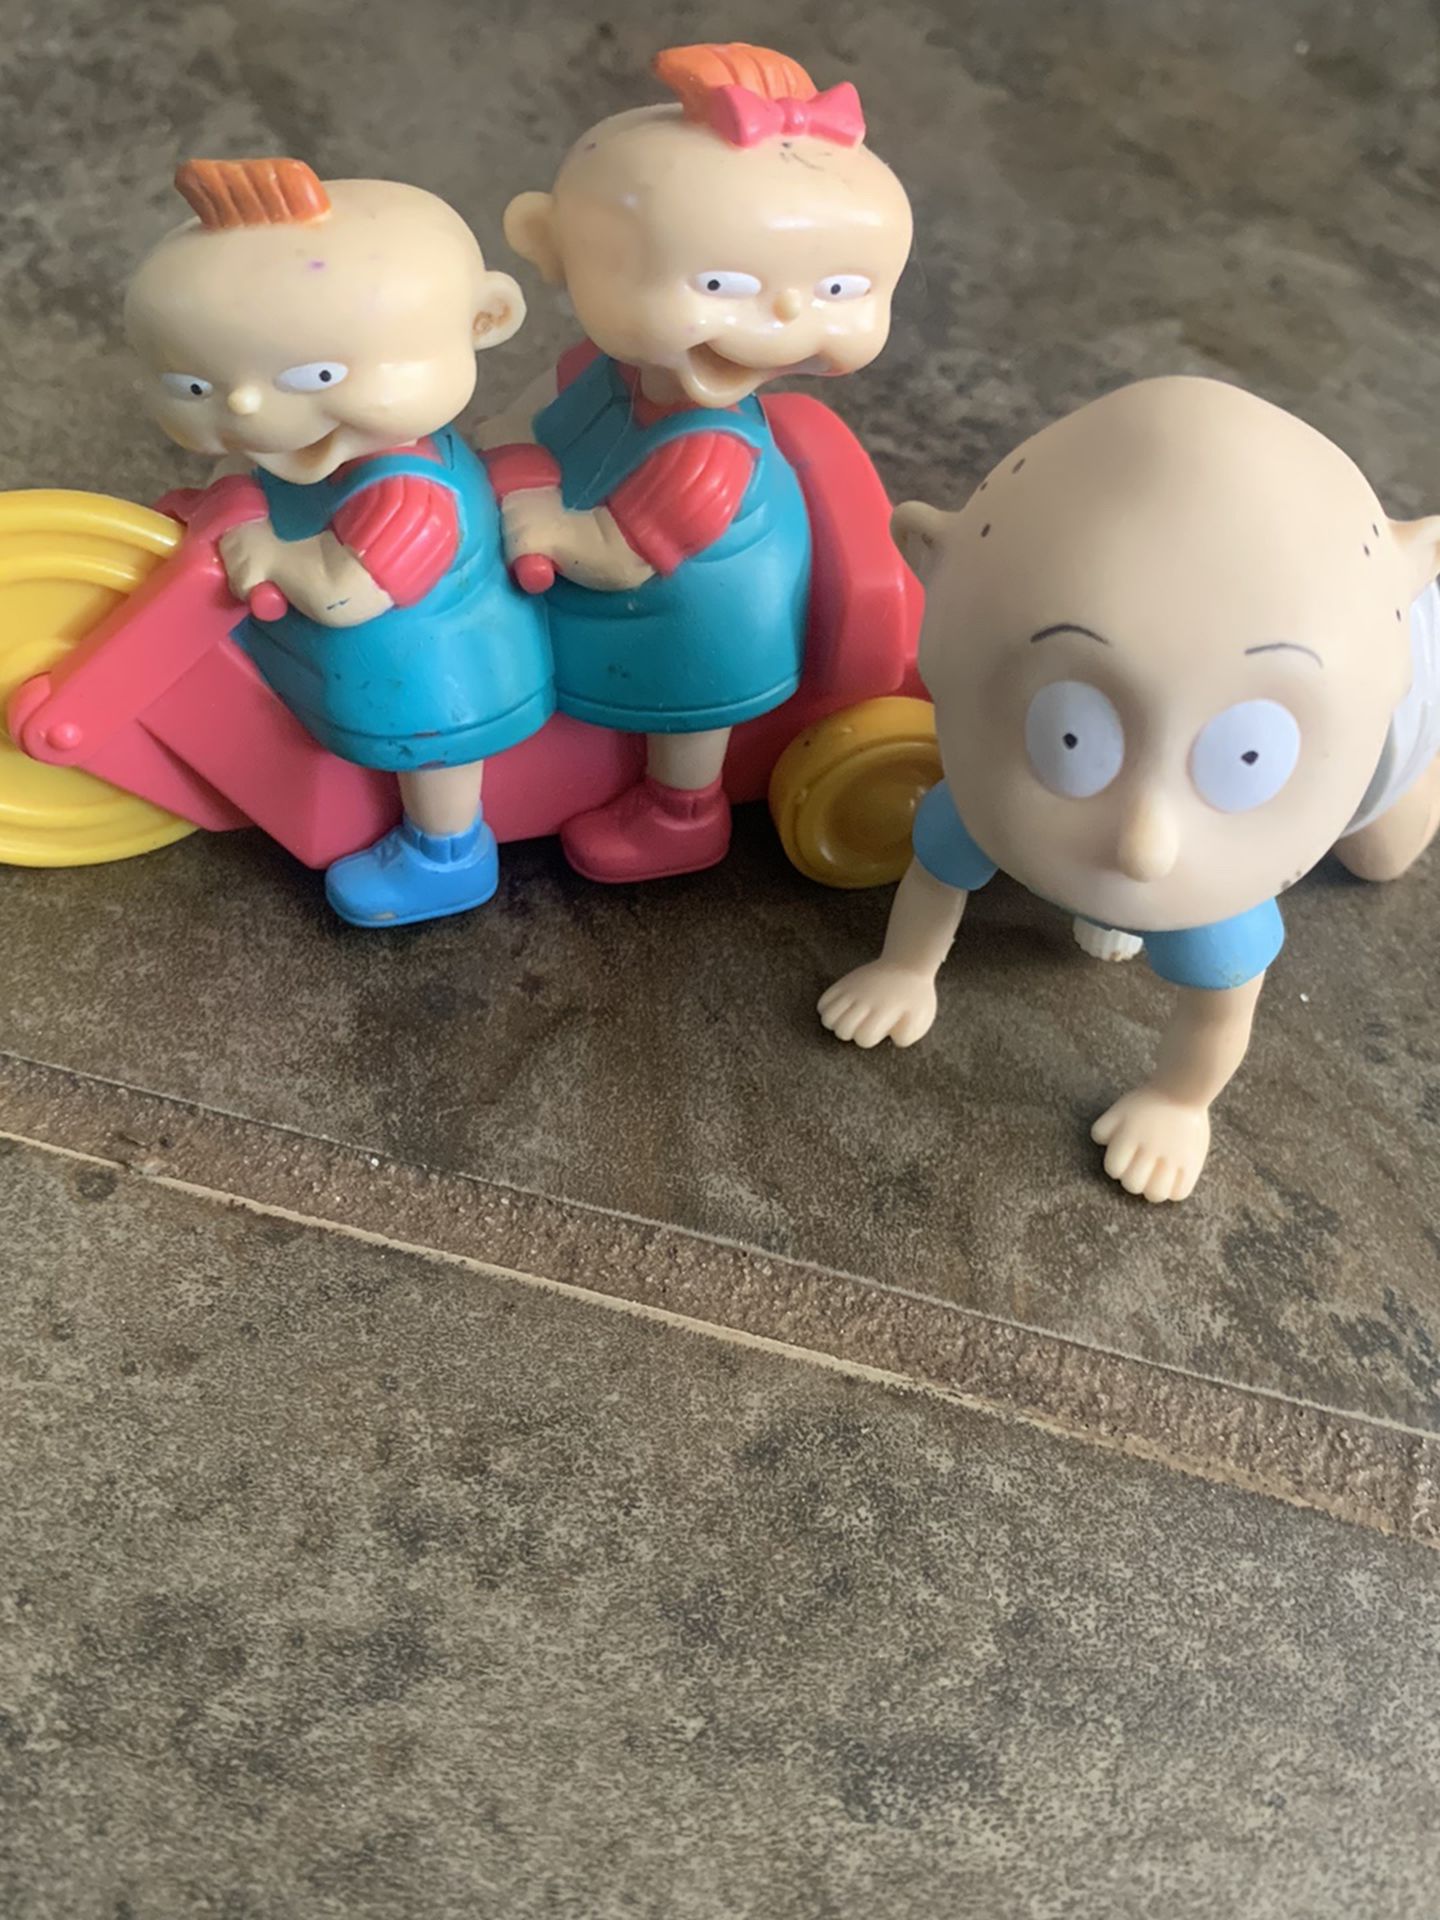 Rugrats Toys